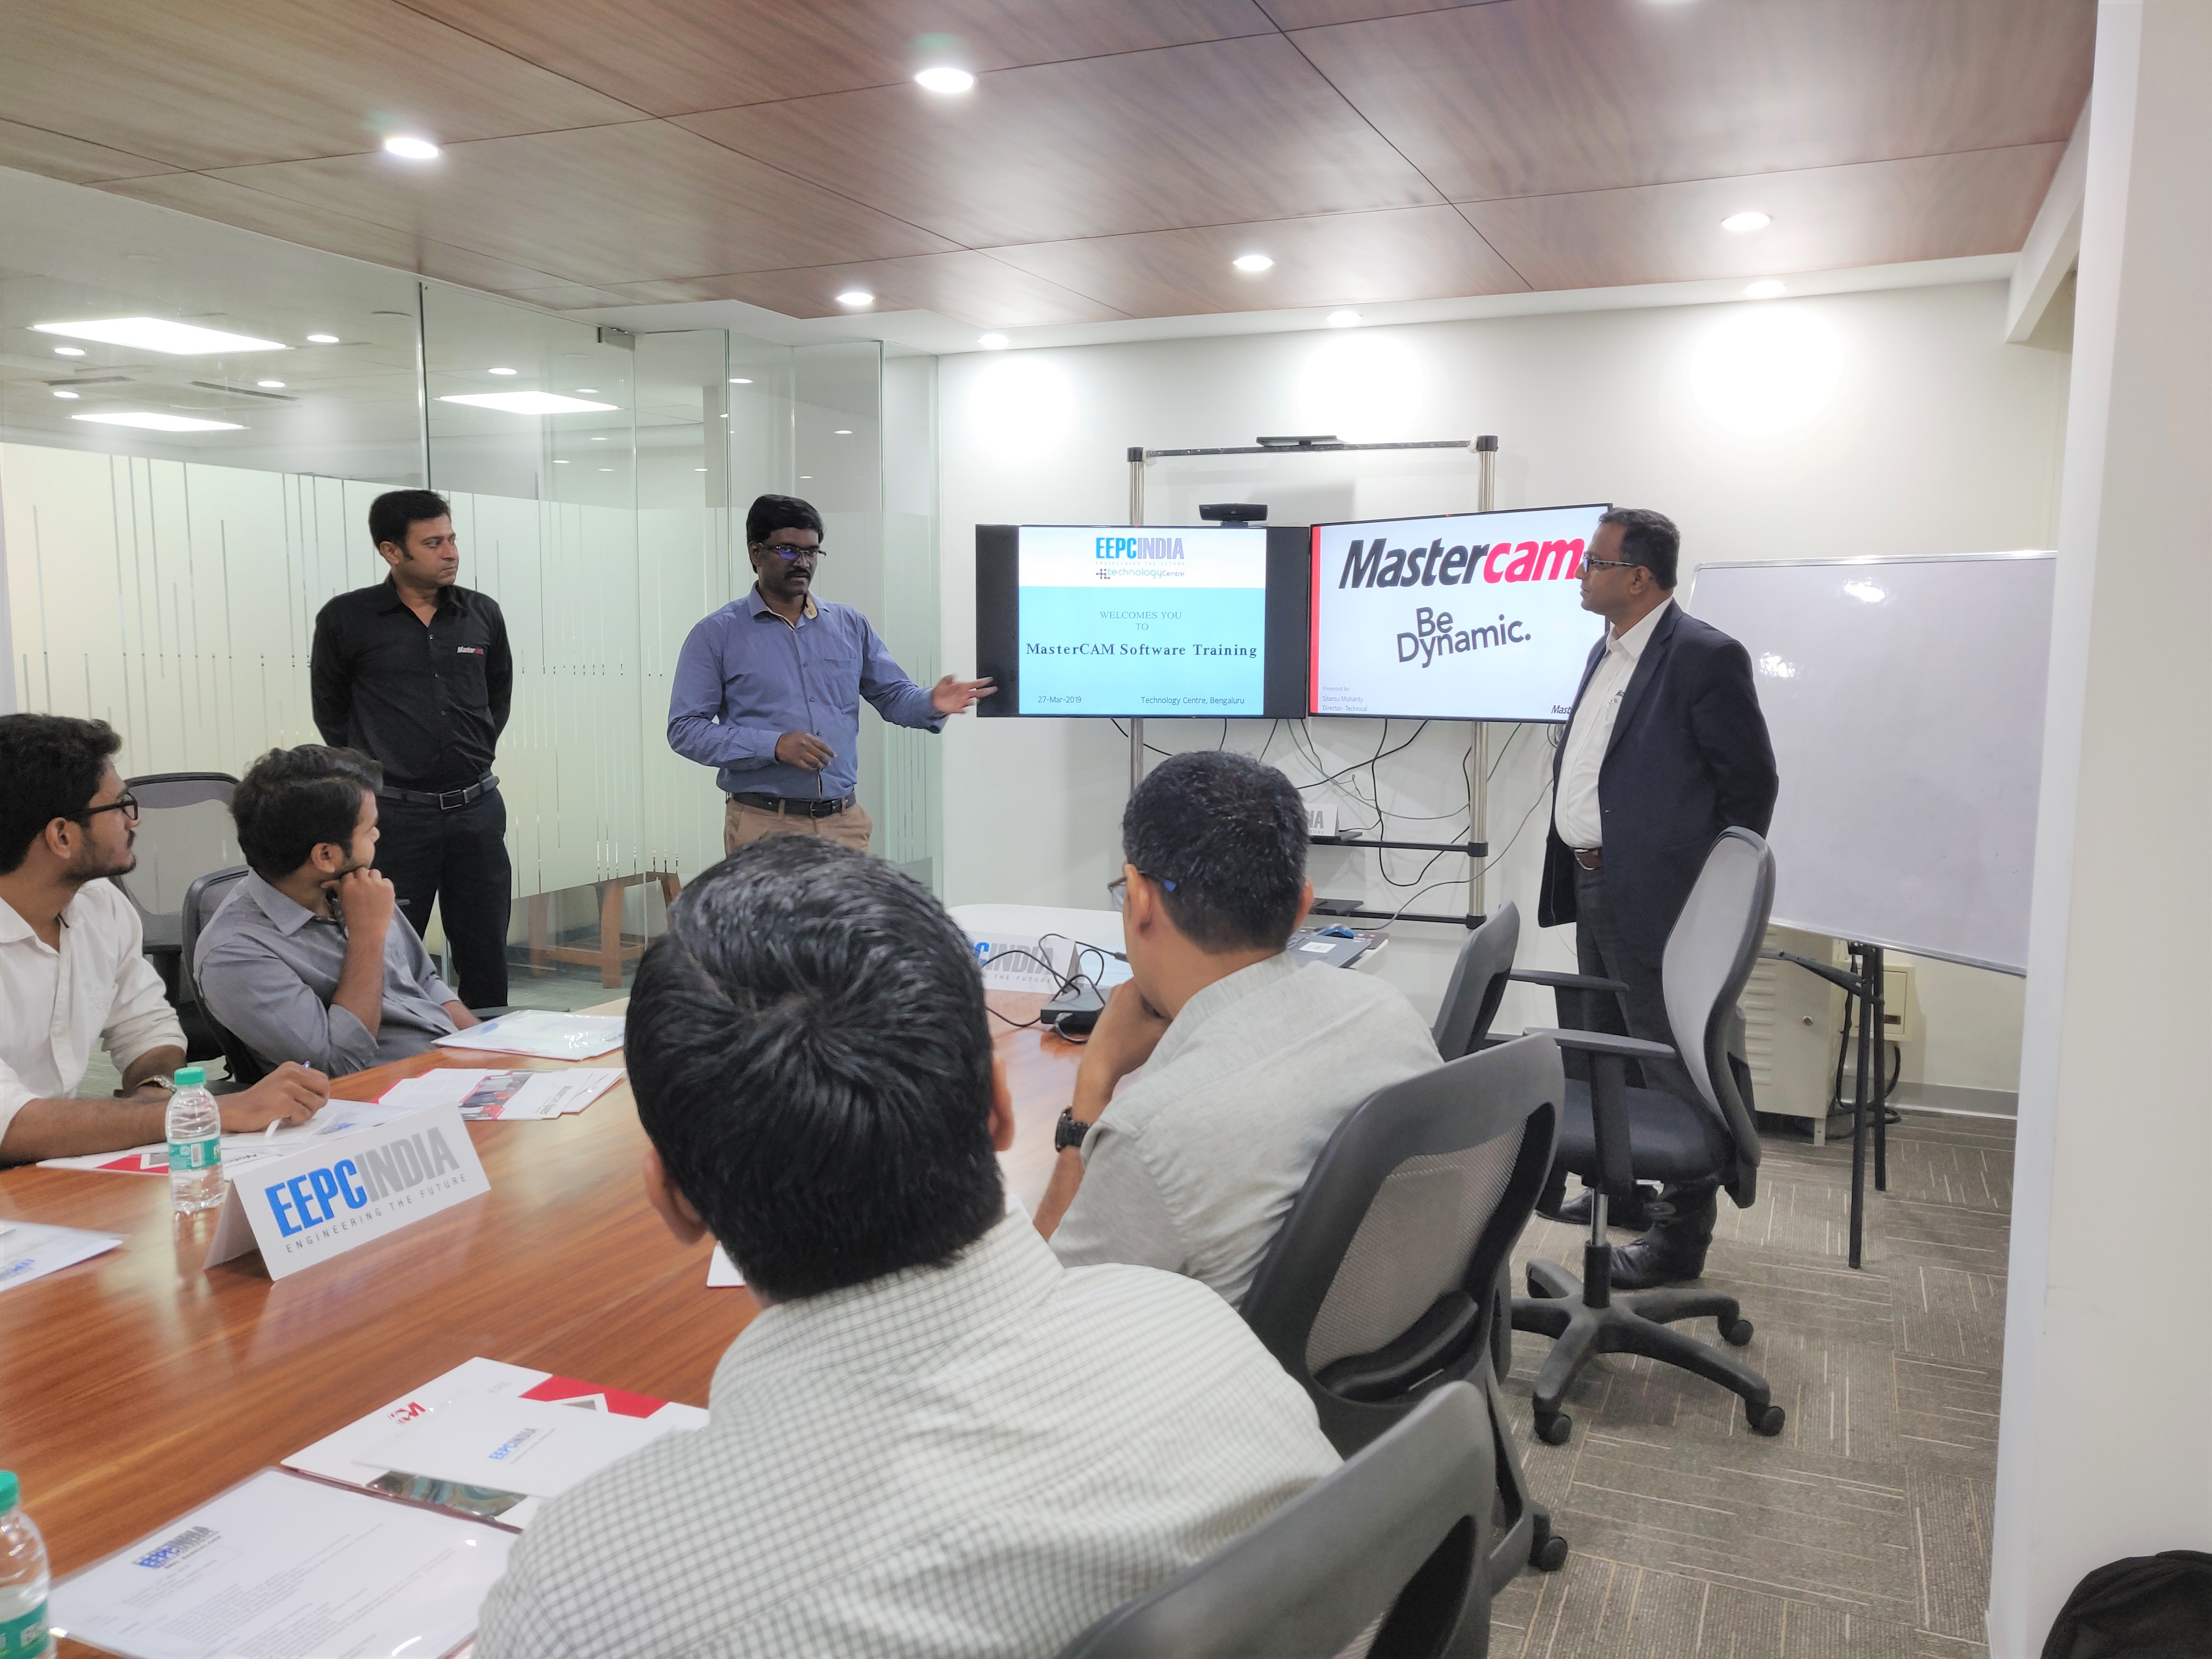 Mr. Karthikeyan, Assistant Head Technology Centre, welcoming the participants